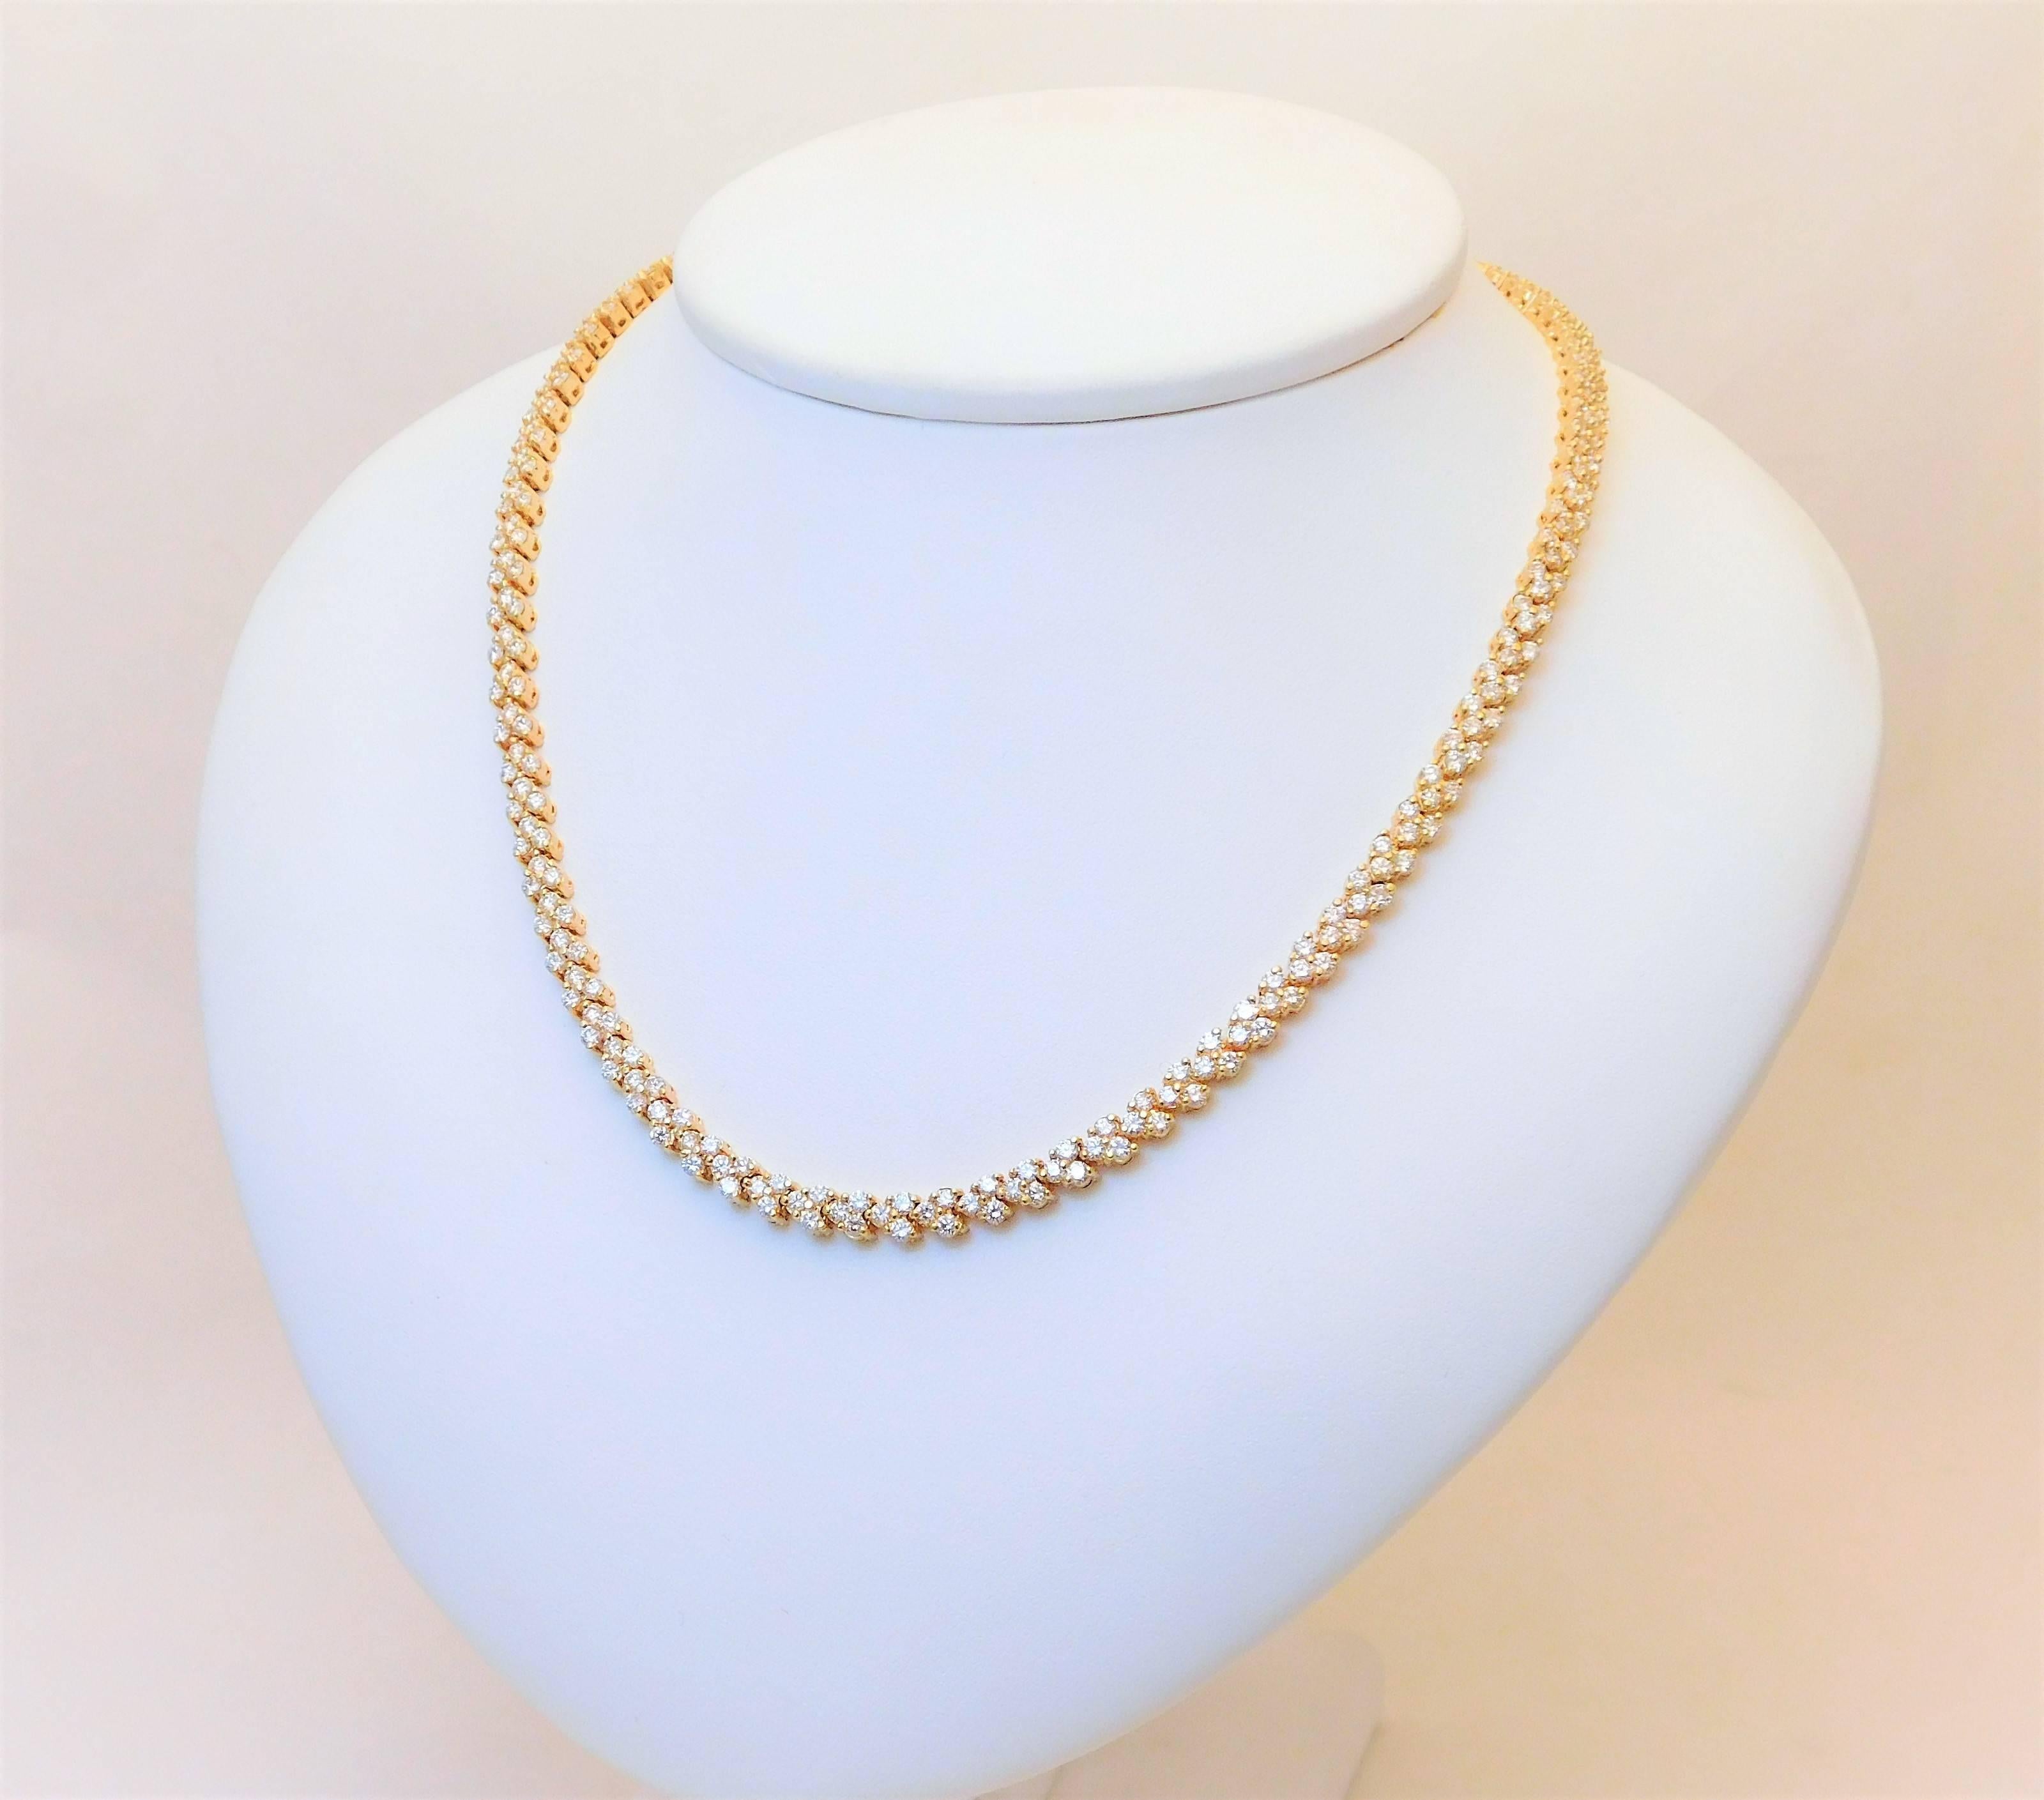 Magnificent 18k Gold Necklace with over 9 Carats of Brilliant Diamonds

This stunning necklace is made of solid 18k yellow gold.  It is elegantly jeweled with 288 bright and sparkling brilliant-cut round diamonds in a luxurious pattern.  The entire